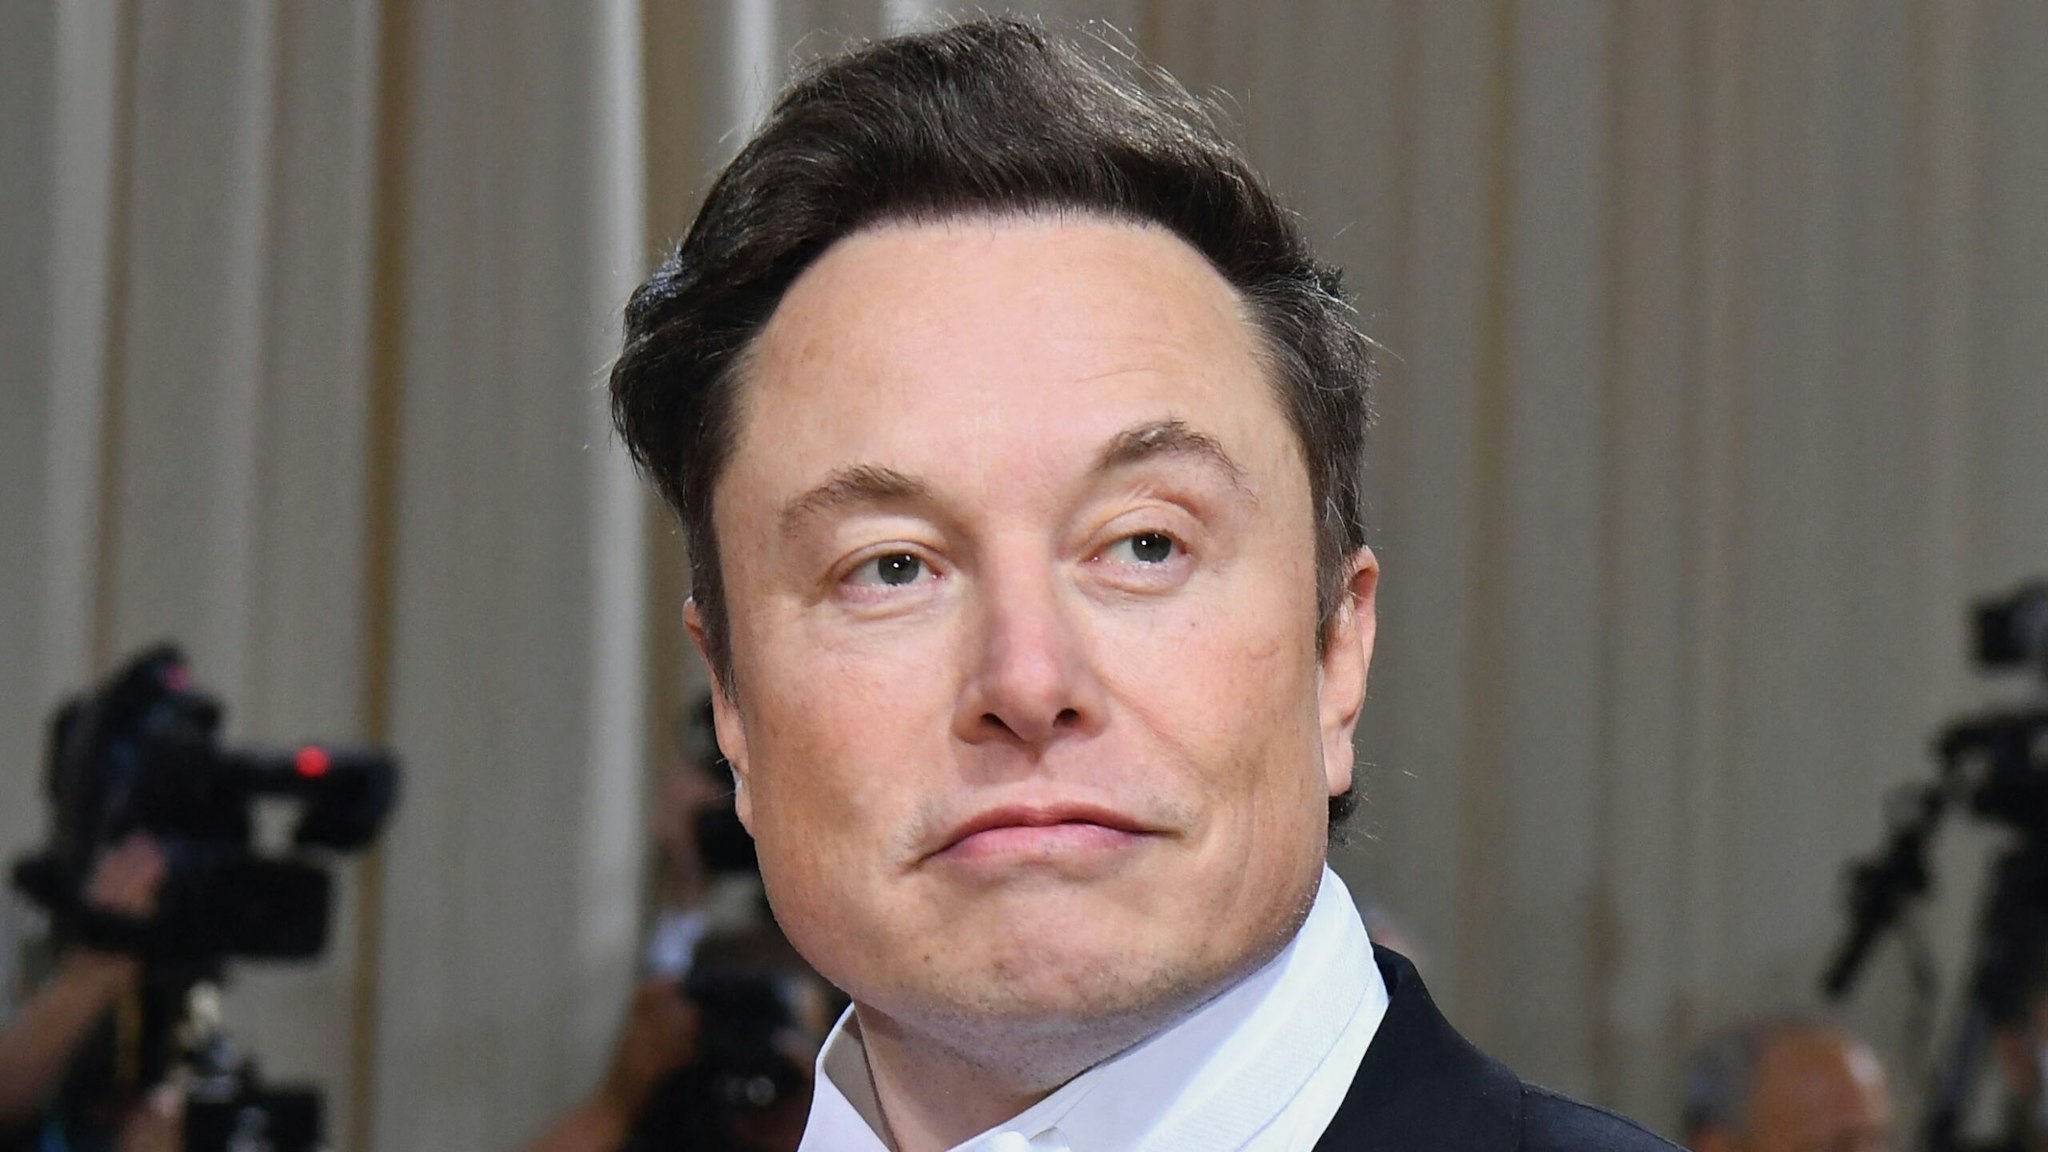 Elon Musk arrives for the 2022 Met Gala at the Metropolitan Museum of Art on May 2, 2022, in New York. - The Gala raises money for the Metropolitan Museum of Art's Costume Institute. The Gala's 2022 theme is "In America: An Anthology of Fashion".